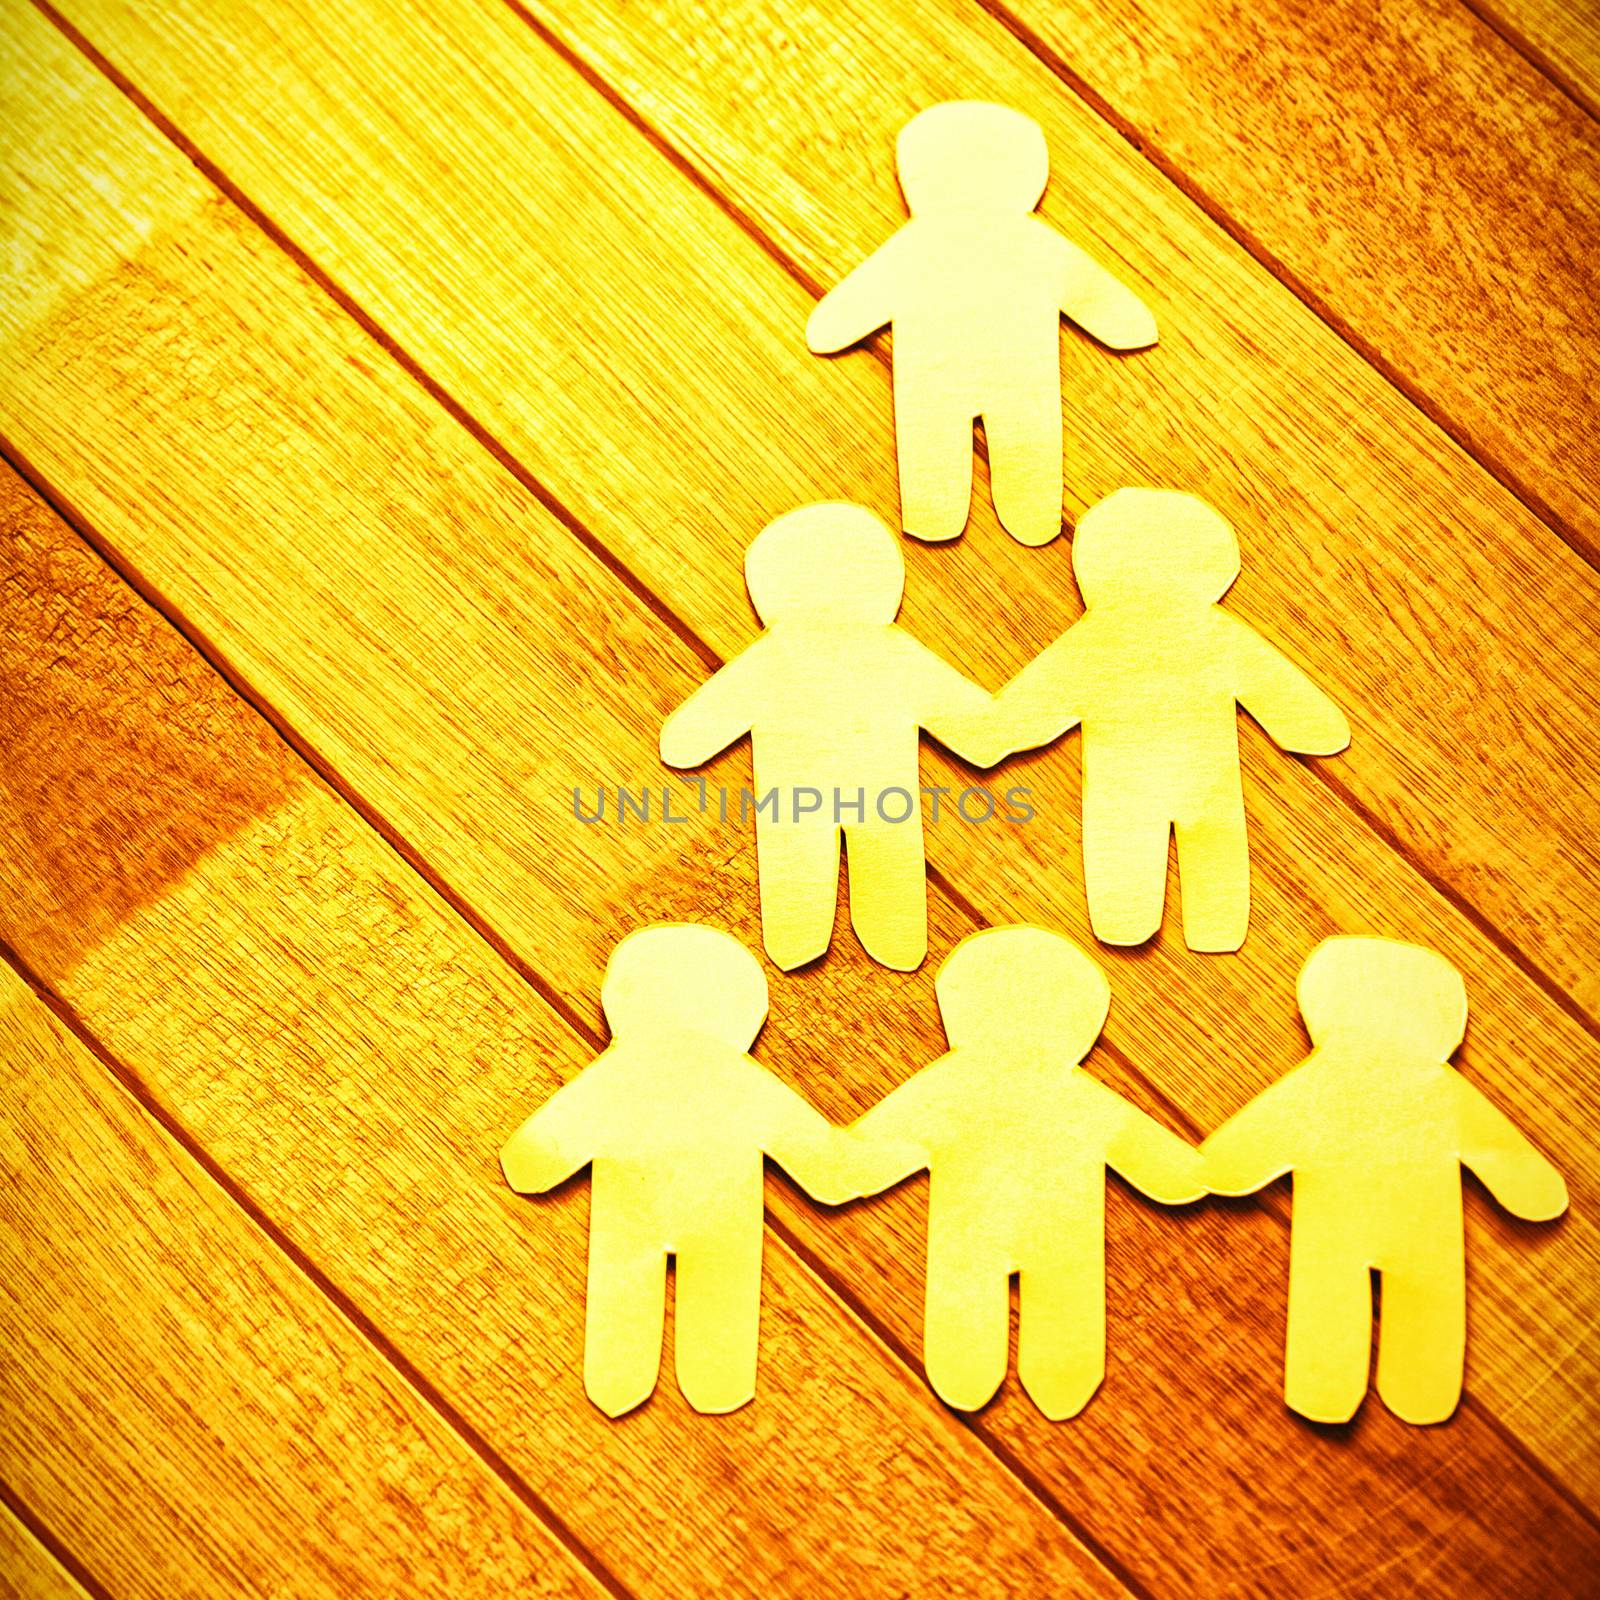 High angle view of paper cut out figures forming human pyramid on wooden table